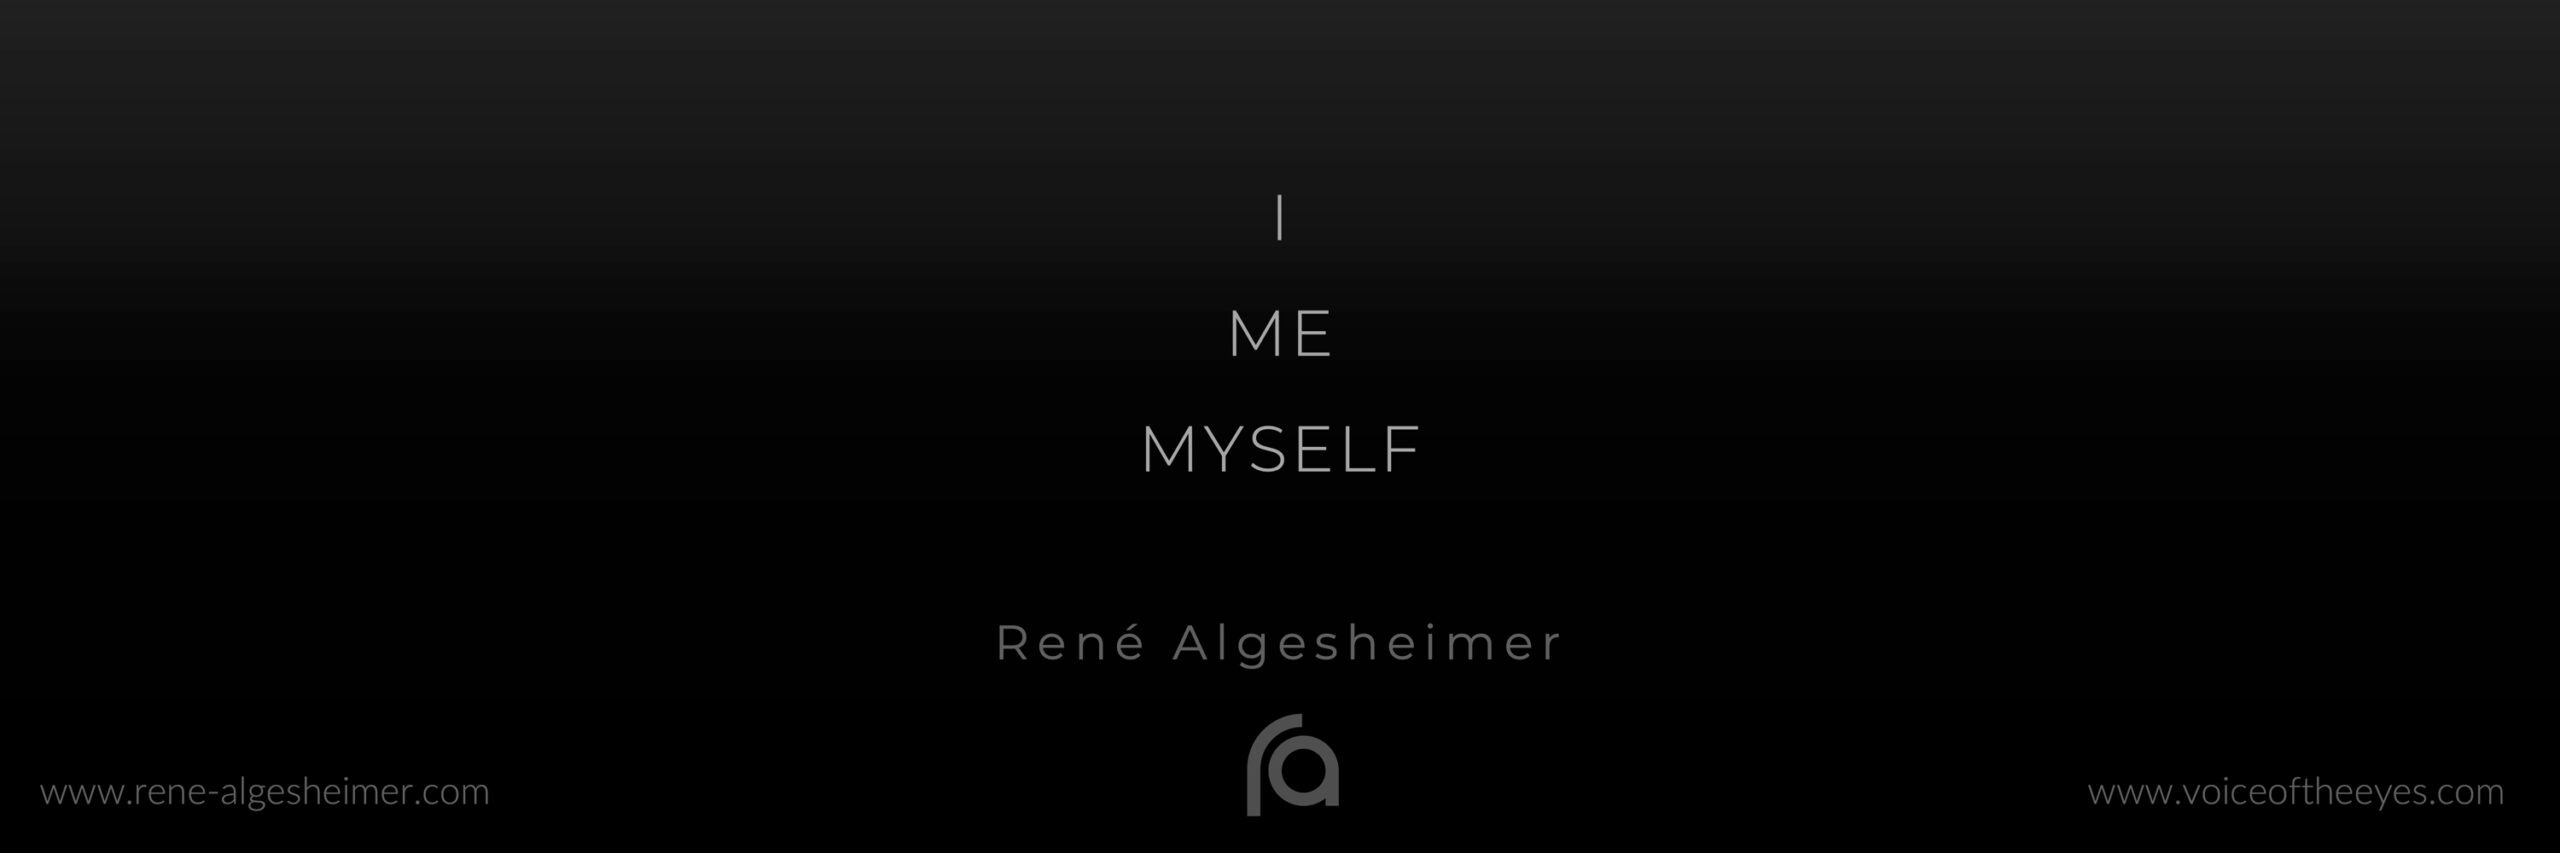 I, me, and myself - a video interview with Paul Hoelen and Nick Monk on YouTube.